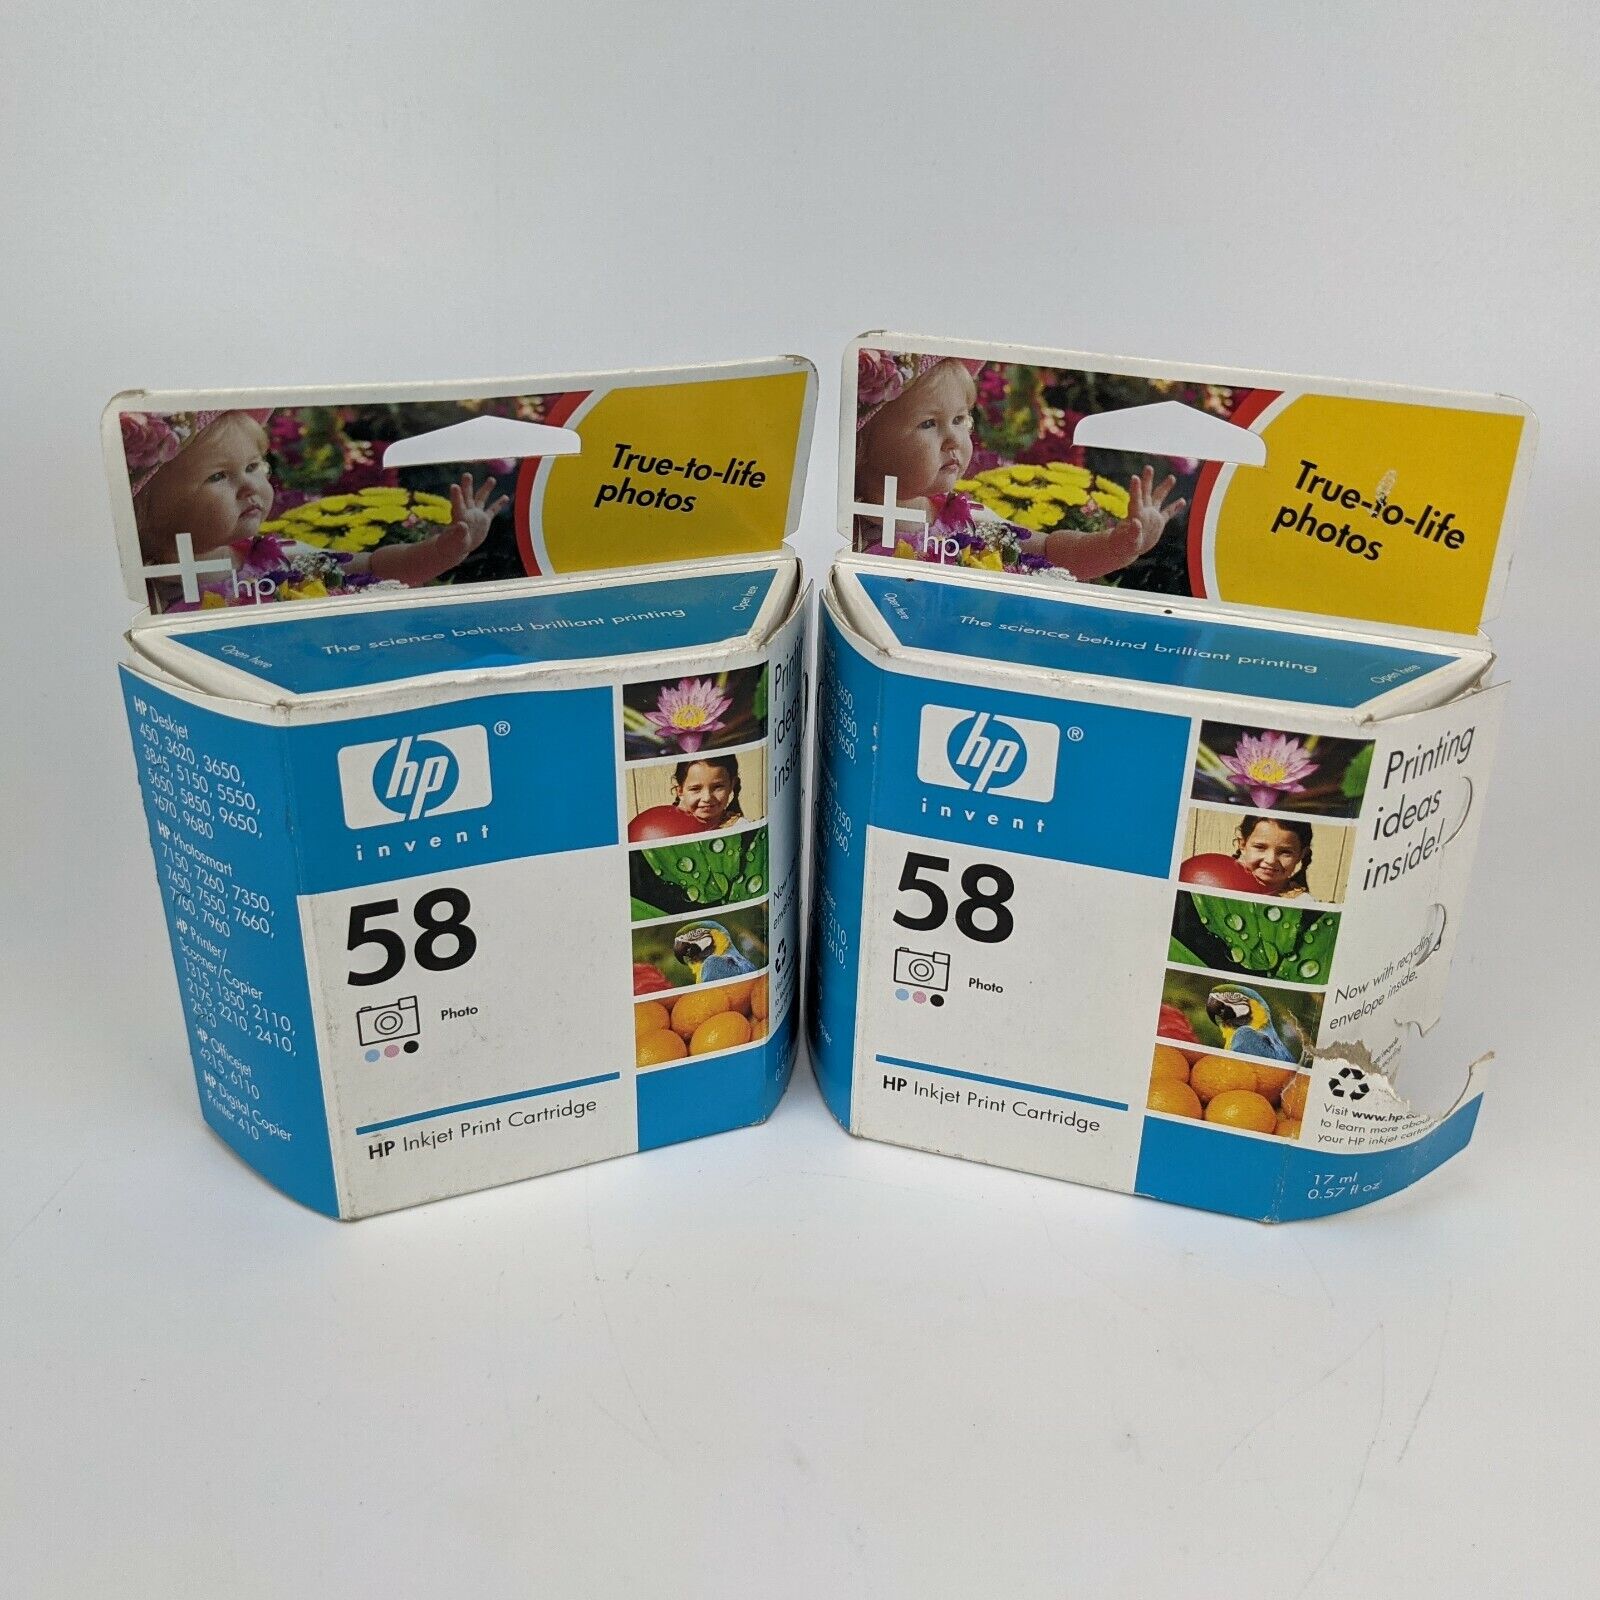 HP 58 Photo Ink Cartridge LOT OF 2 - new sealed EXP MAY 2006